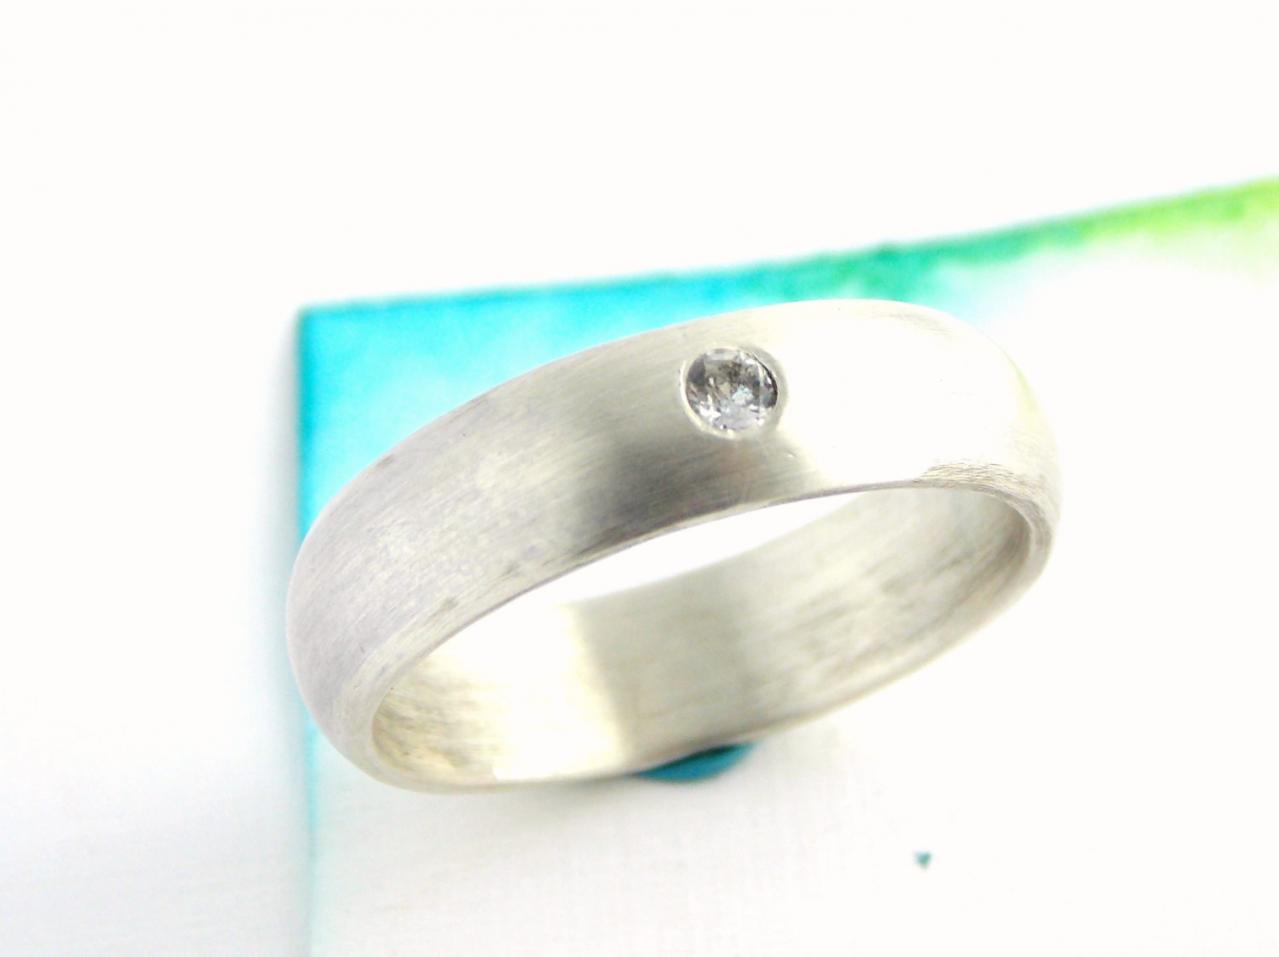 Wide Band Unisex Ring - sterling silver ring / silver ring / wide ring / wedding ring / wedding band